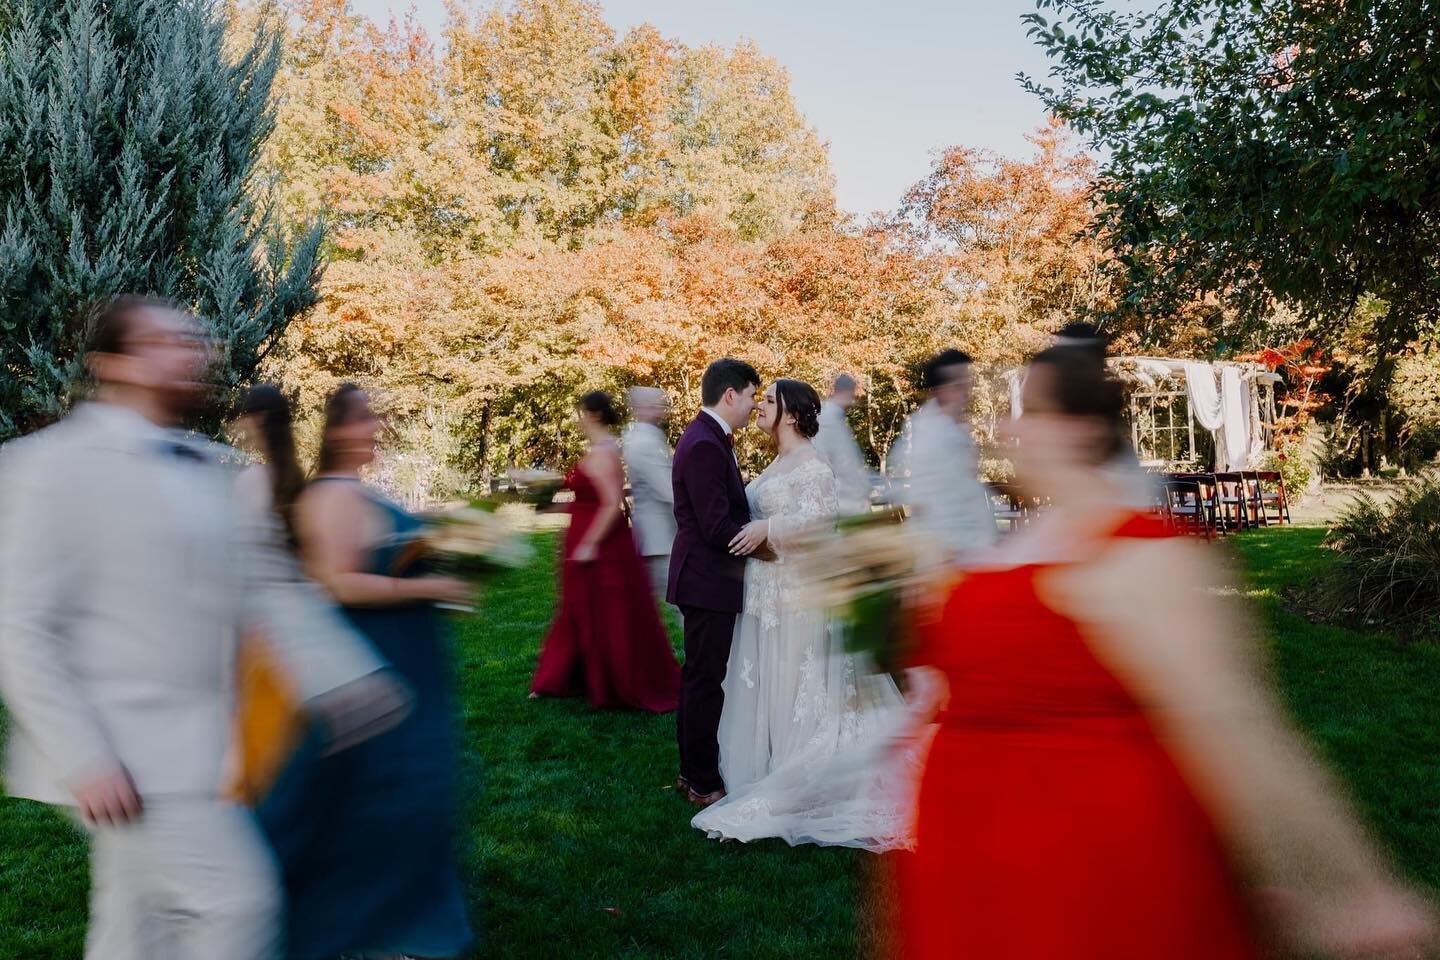 Grateful for the trust of Rachel and Kyle and their amazing wedding party, letting the creativity flow in this one-of-a-kind snapshot! 

In this sneak peek, where their day movies around them as they can't help but fall in love deeper. With some laug